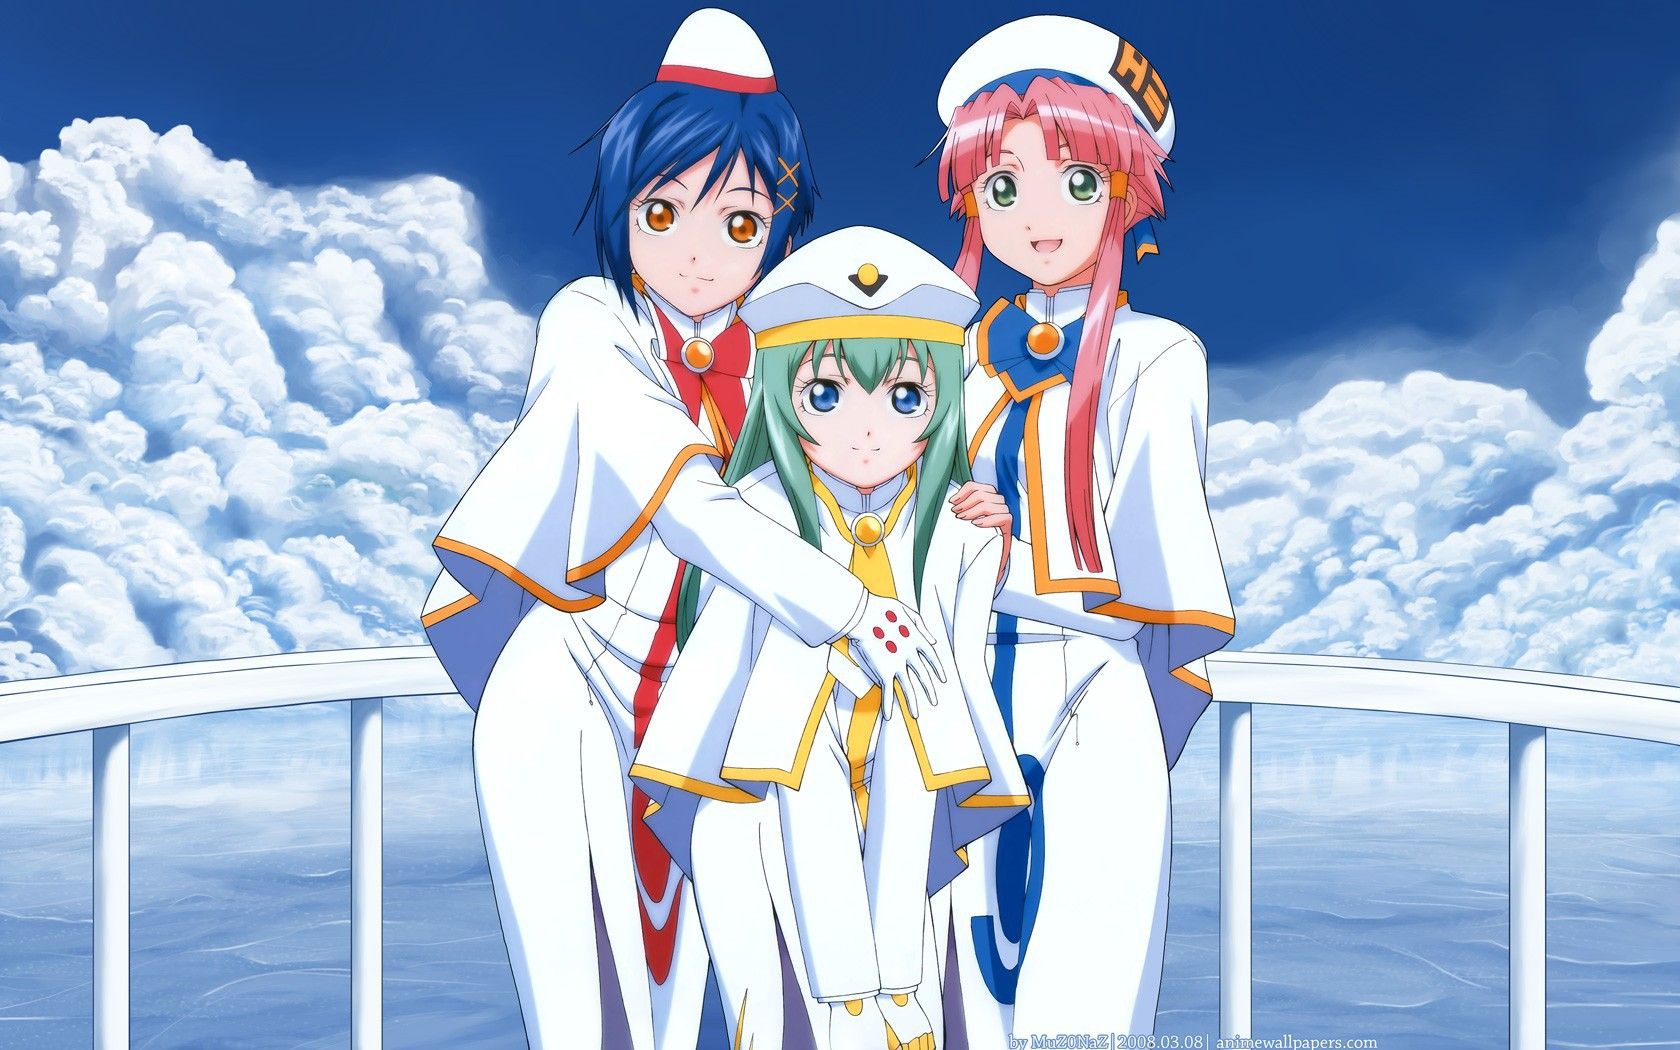 Three friends in the anime Aria wallpaper and image, picture, photo